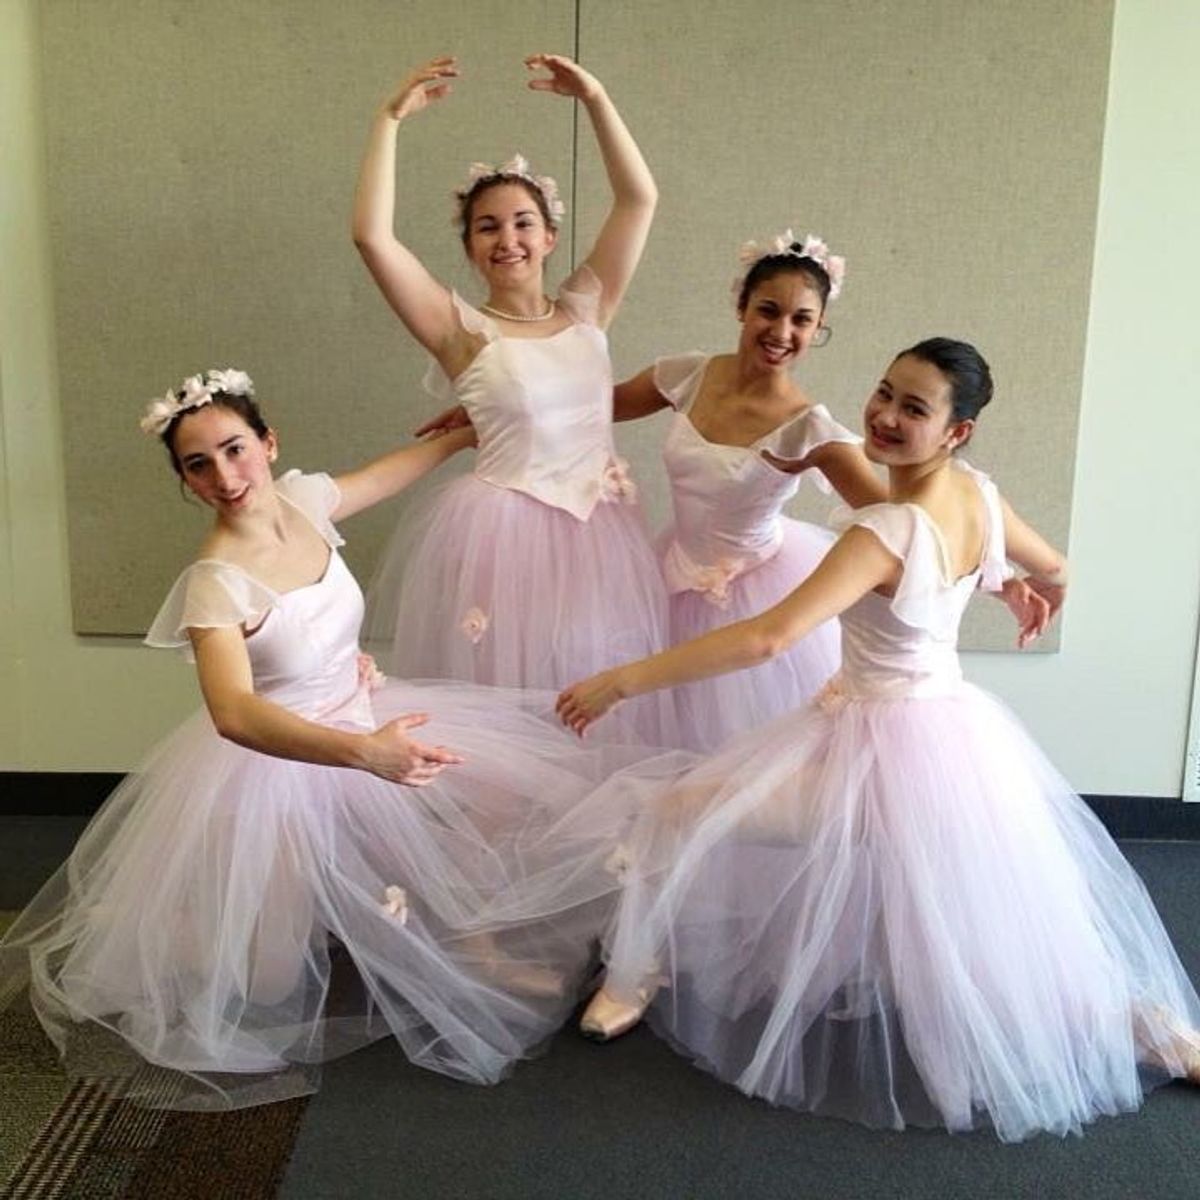 11 Things Dance Has Taught Me That Have Nothing To Do With Dance